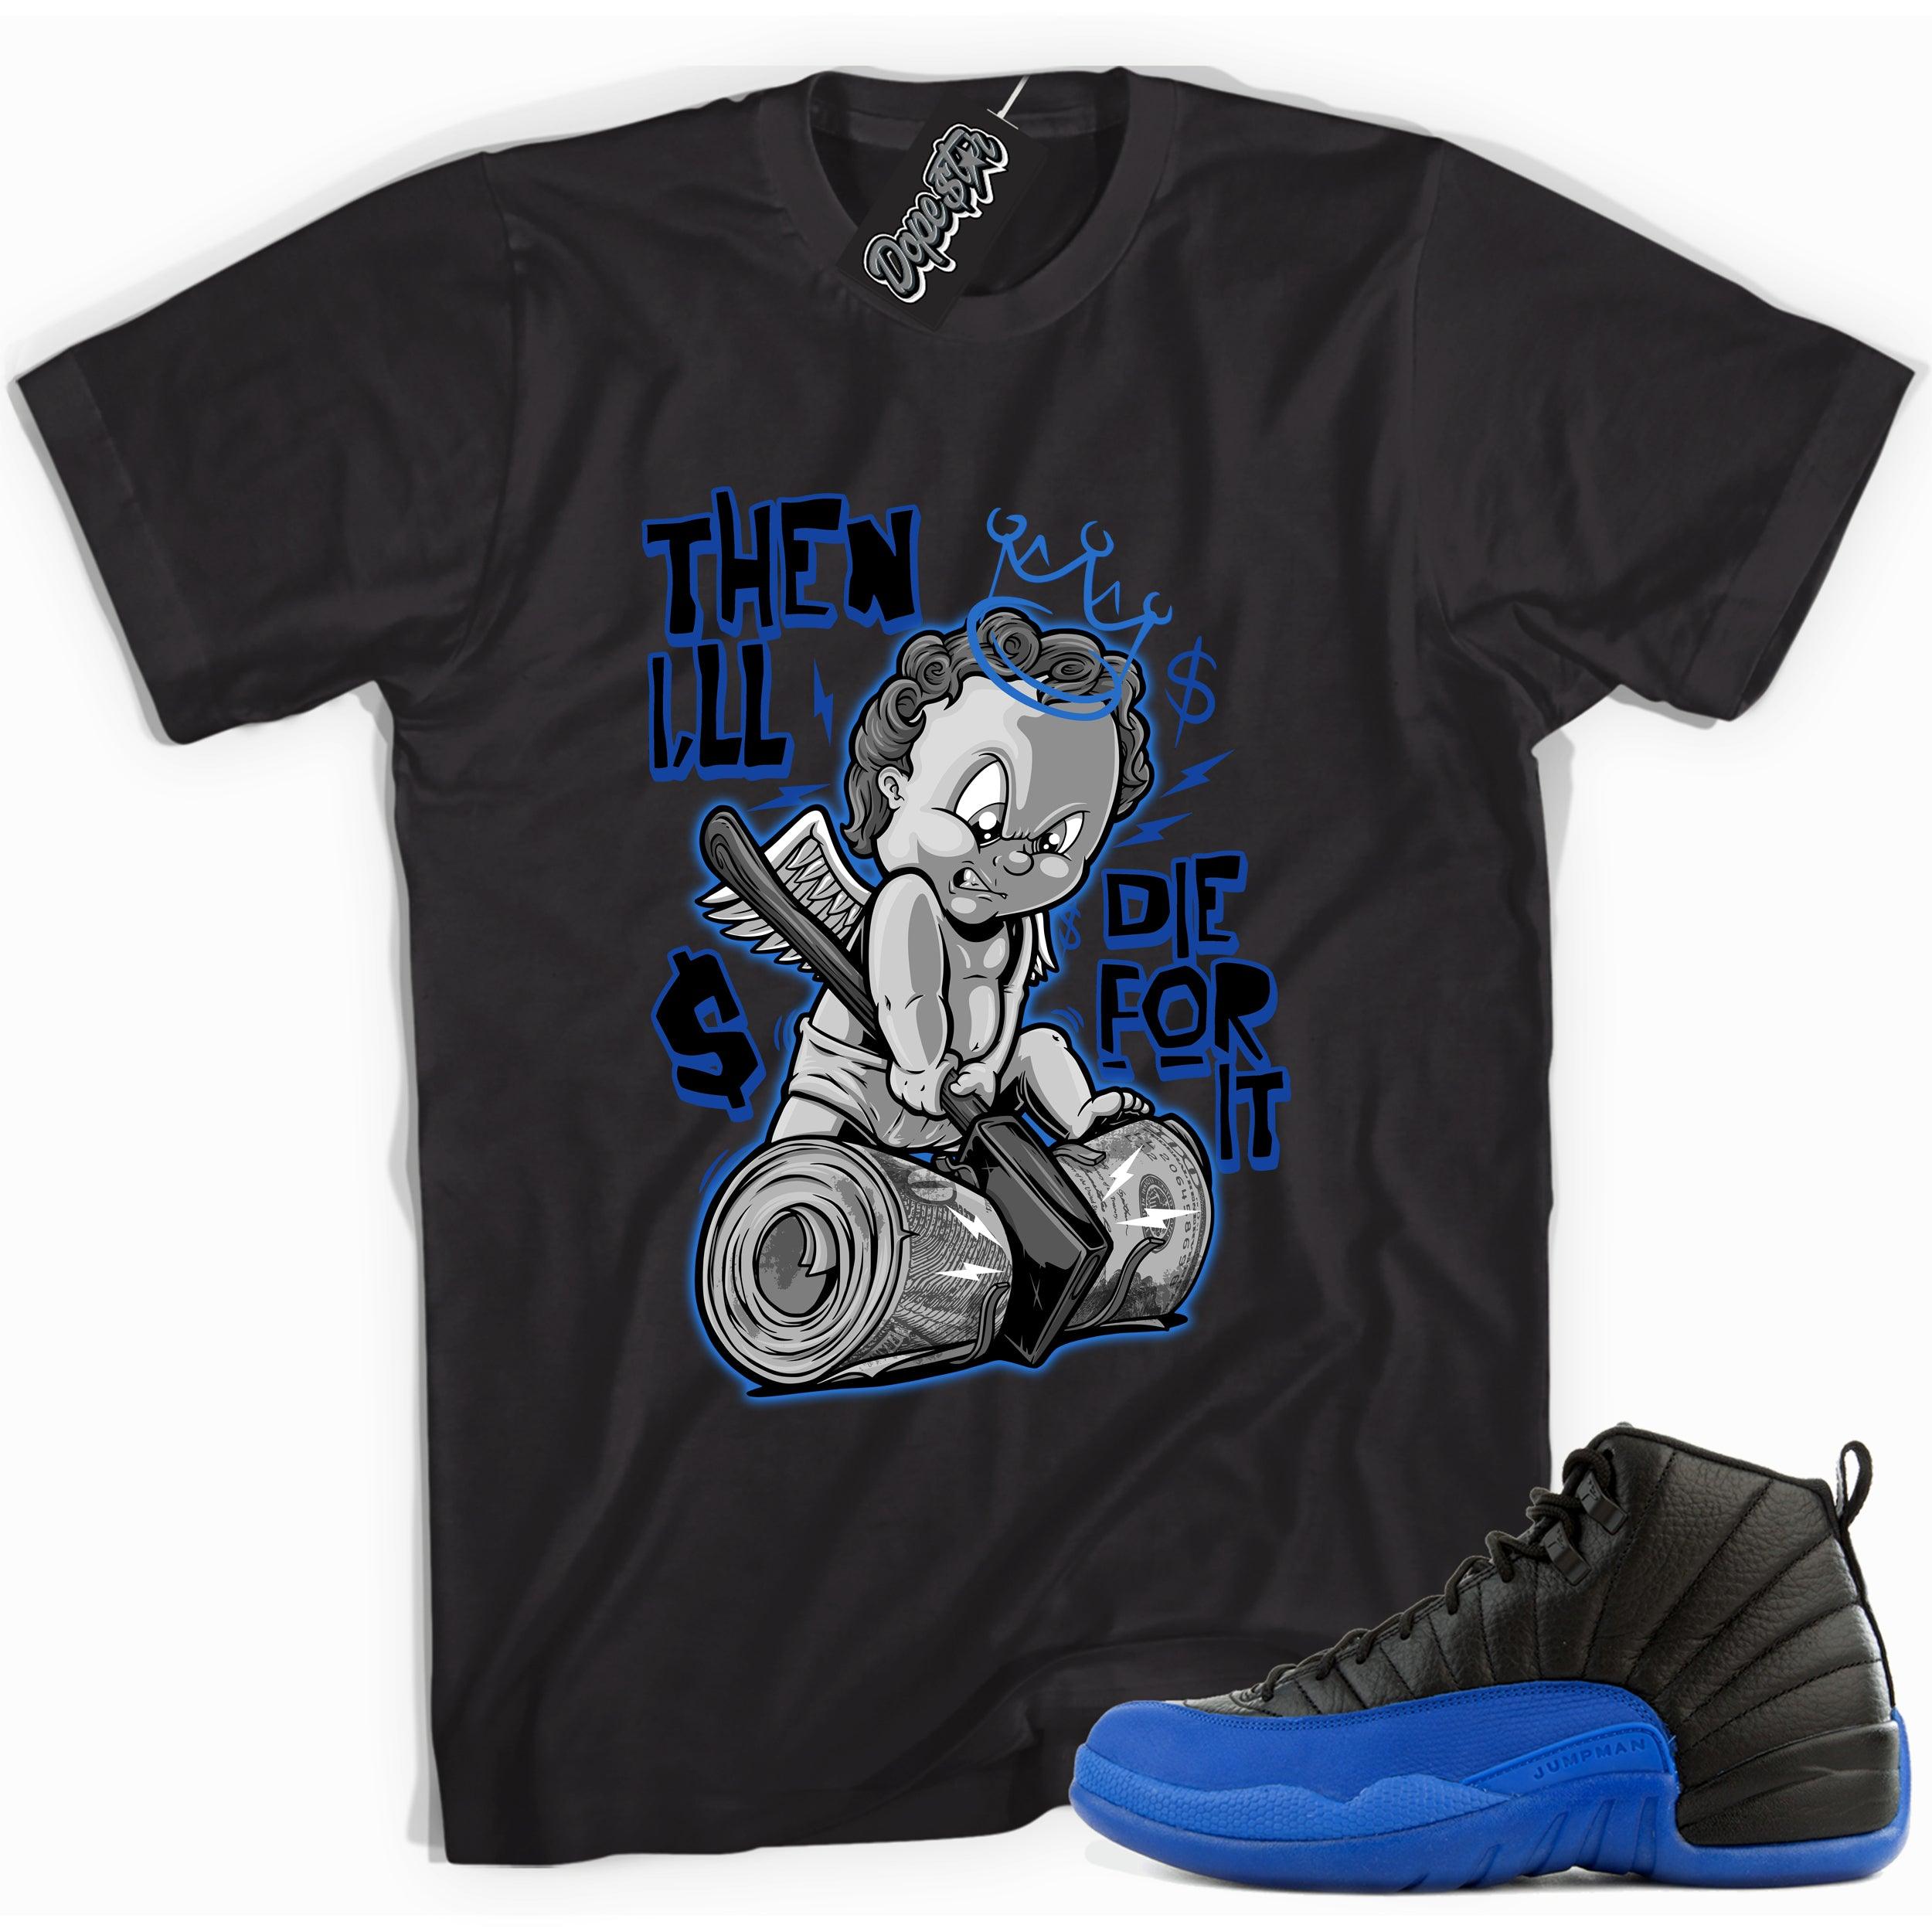 Cool black graphic tee with 'ill die for it' print, that perfectly matches  Air Jordan 12 Retro Black Game Royal sneakers.